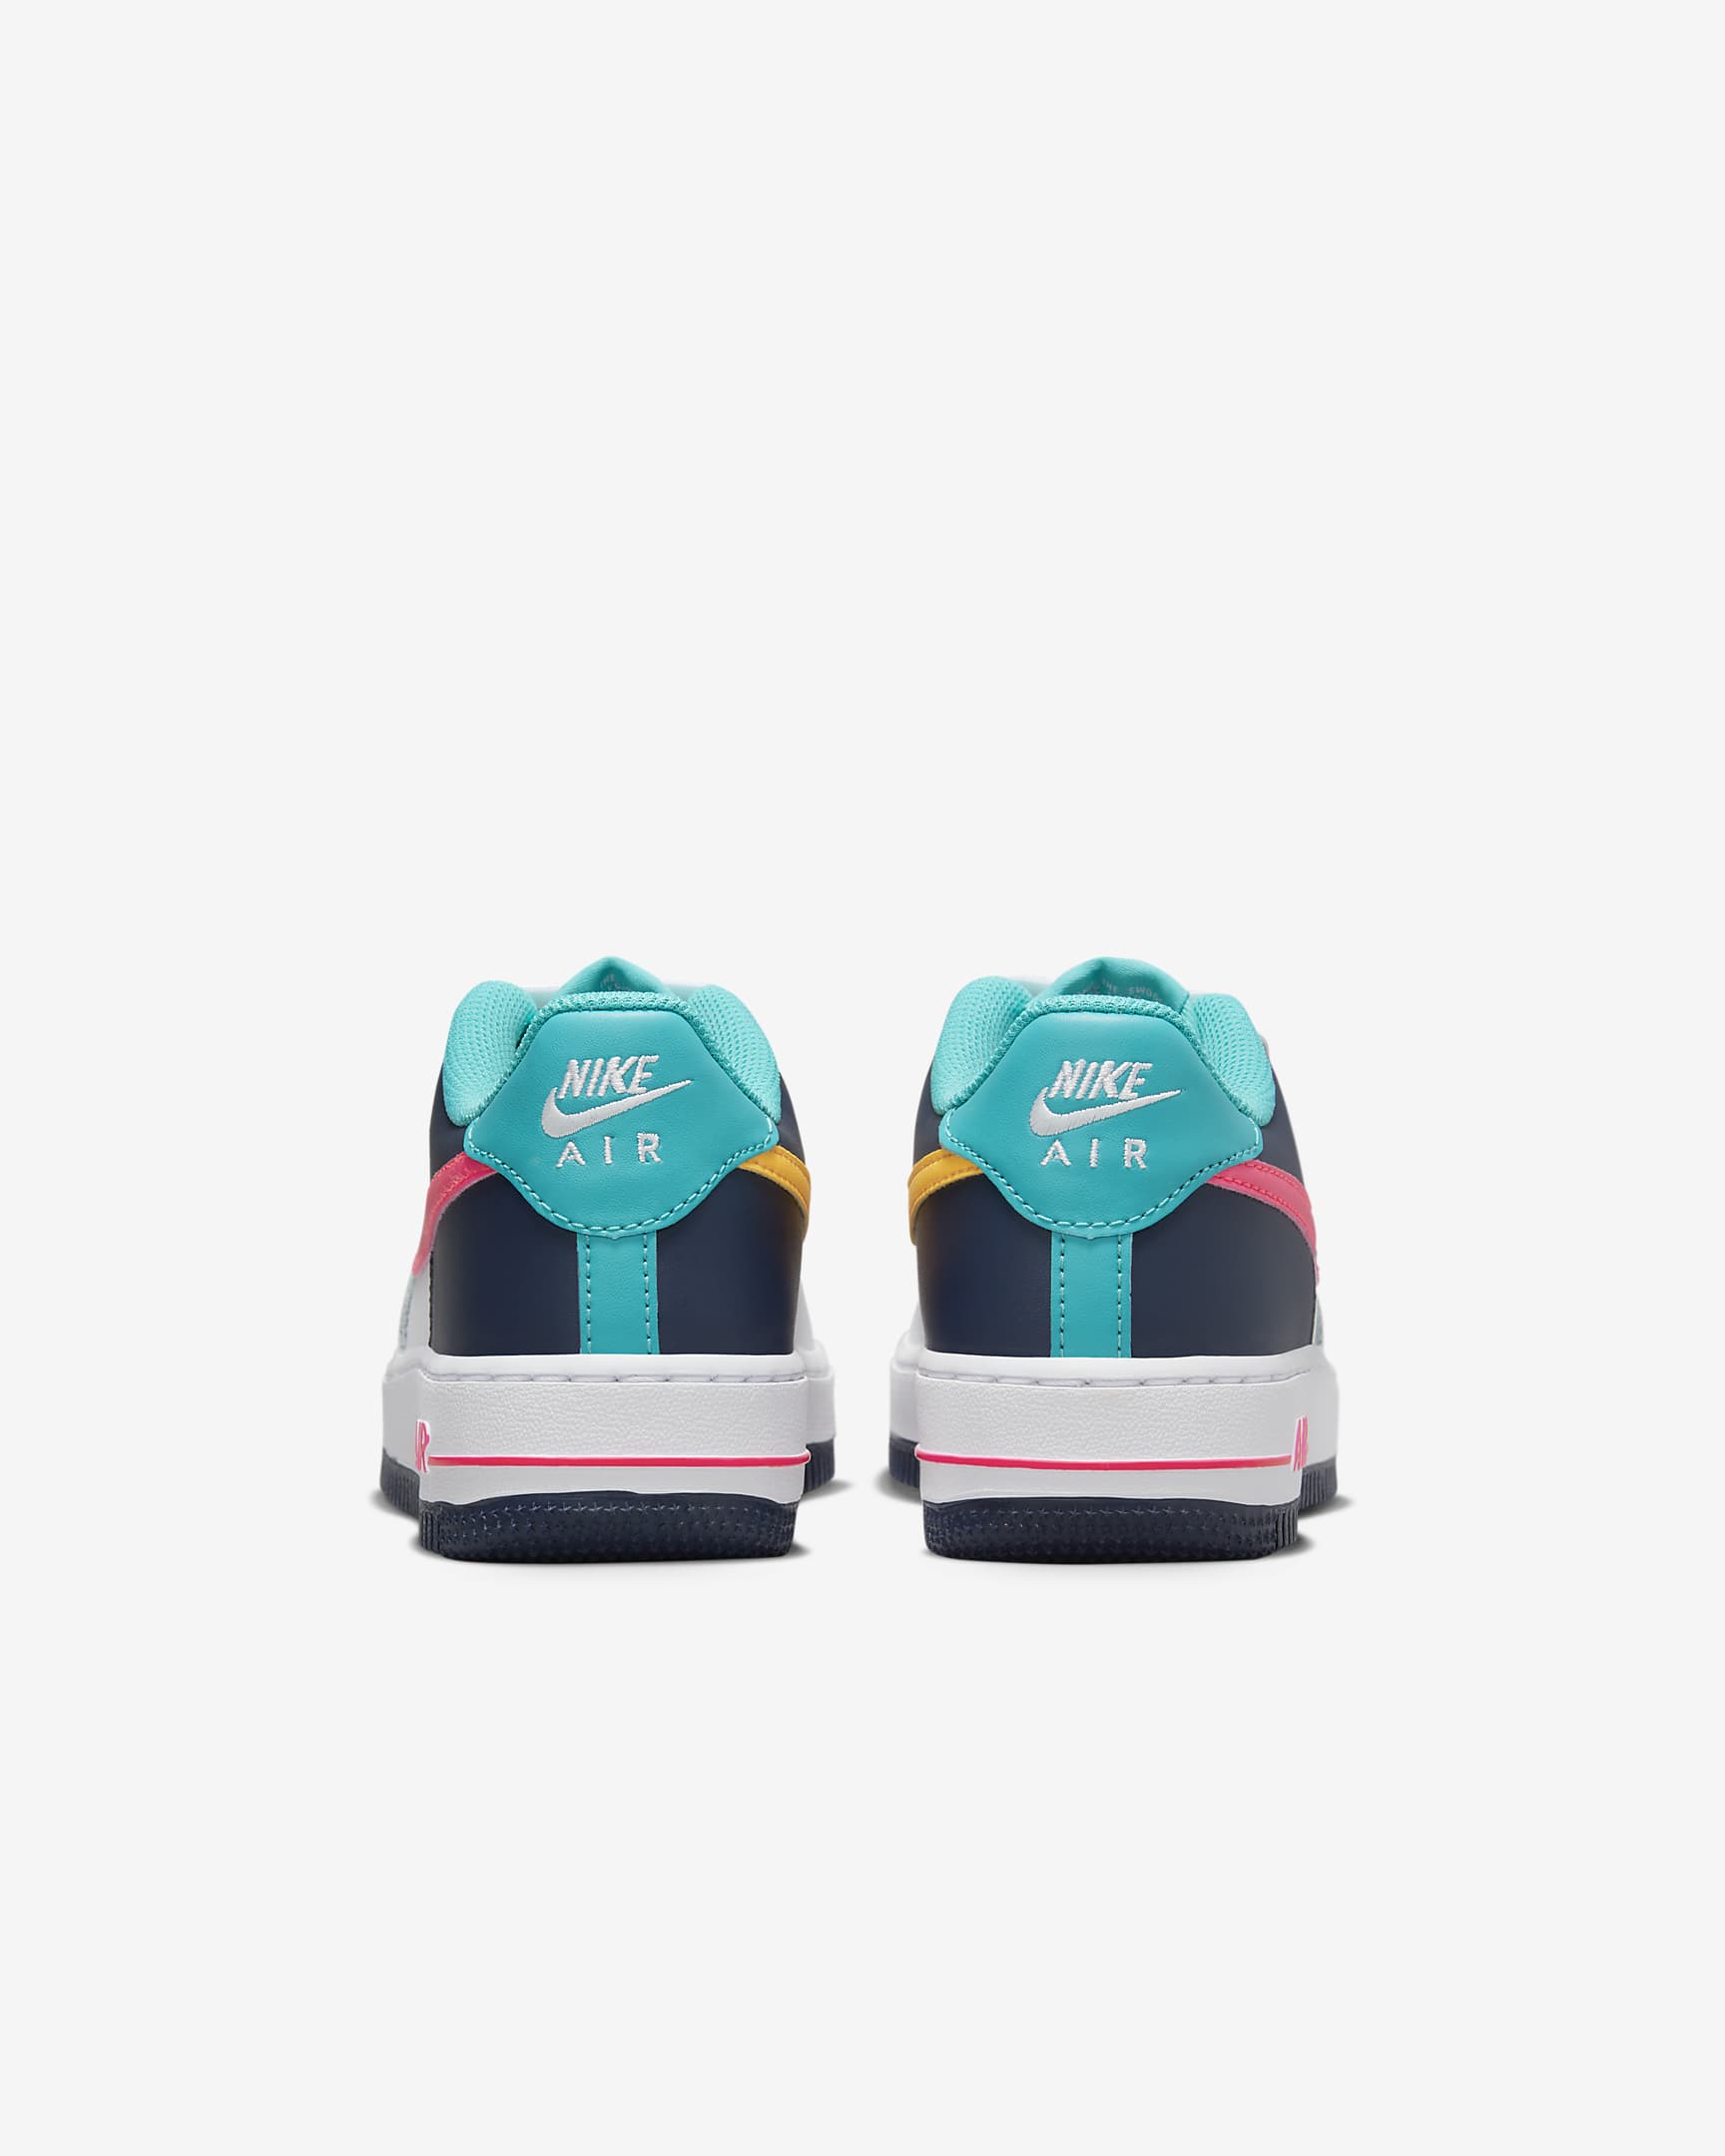 Nike Air Force 1 Older Kids' Shoes - White/Thunder Blue/Dusty Cactus/Racer Pink